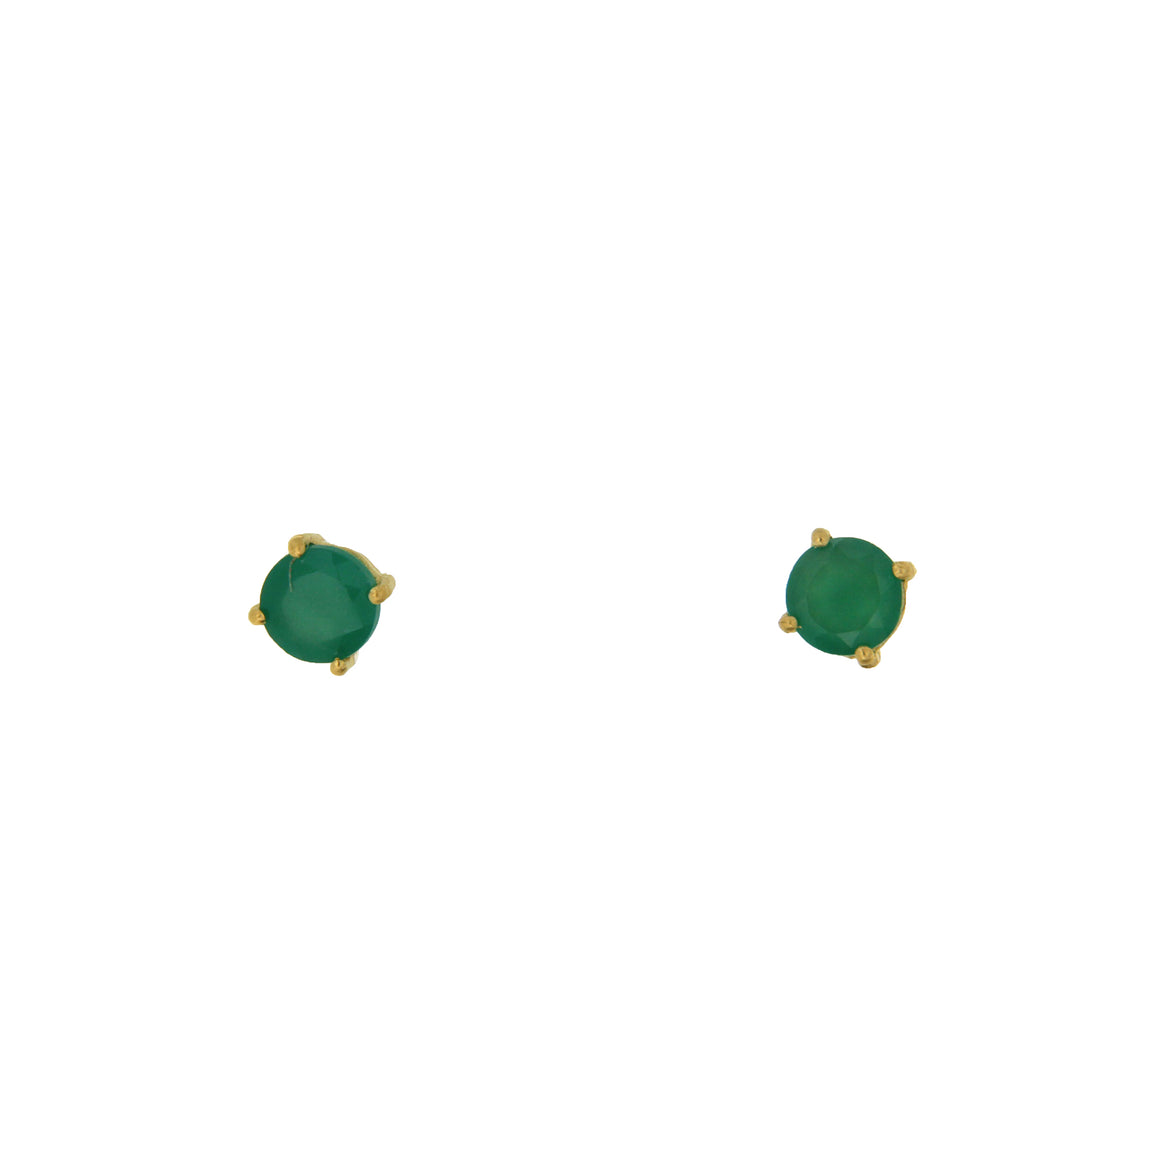 Faceted Green Onyx Studs in a prong setting. Set in 22 carat Vermeil over Sterling Silver. Perfect for everyday wear.